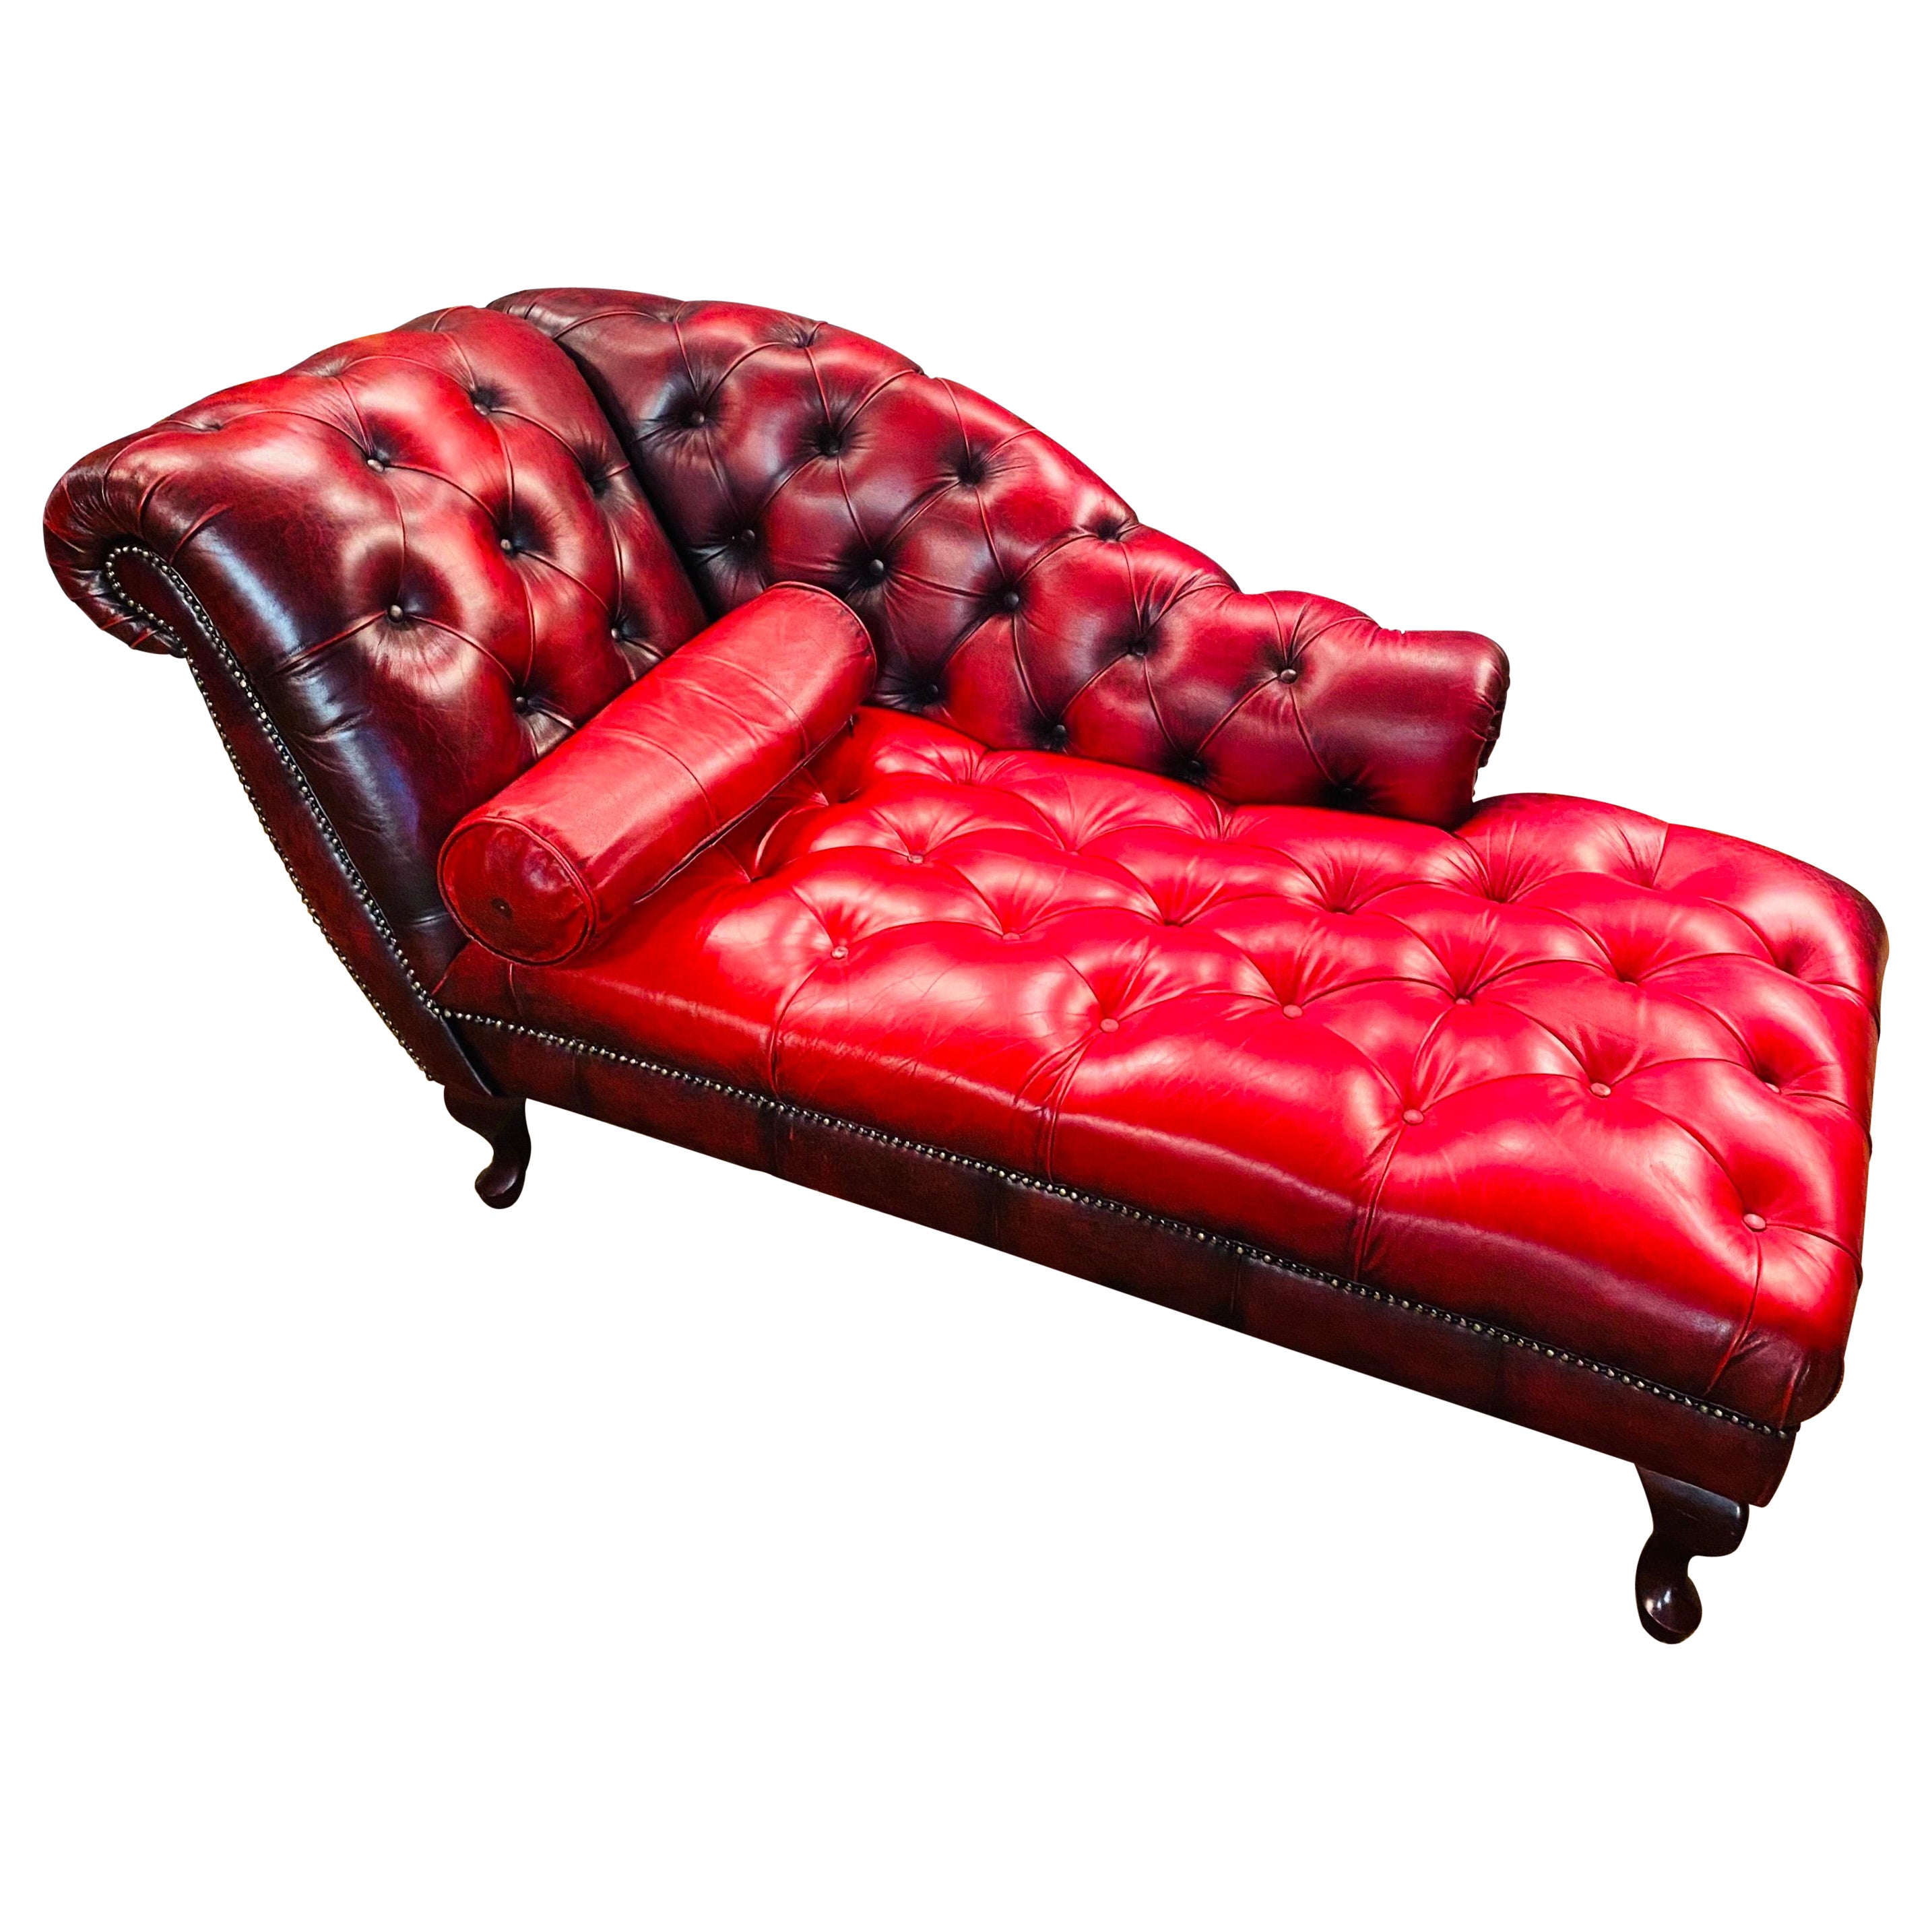 Lovely original vintage Chesterfield Red Leather Chaise Lounge Daybed Sofa  For Sale at 1stDibs | chesterfield daybed, lovely lounge, red leather chaise  lounge chair